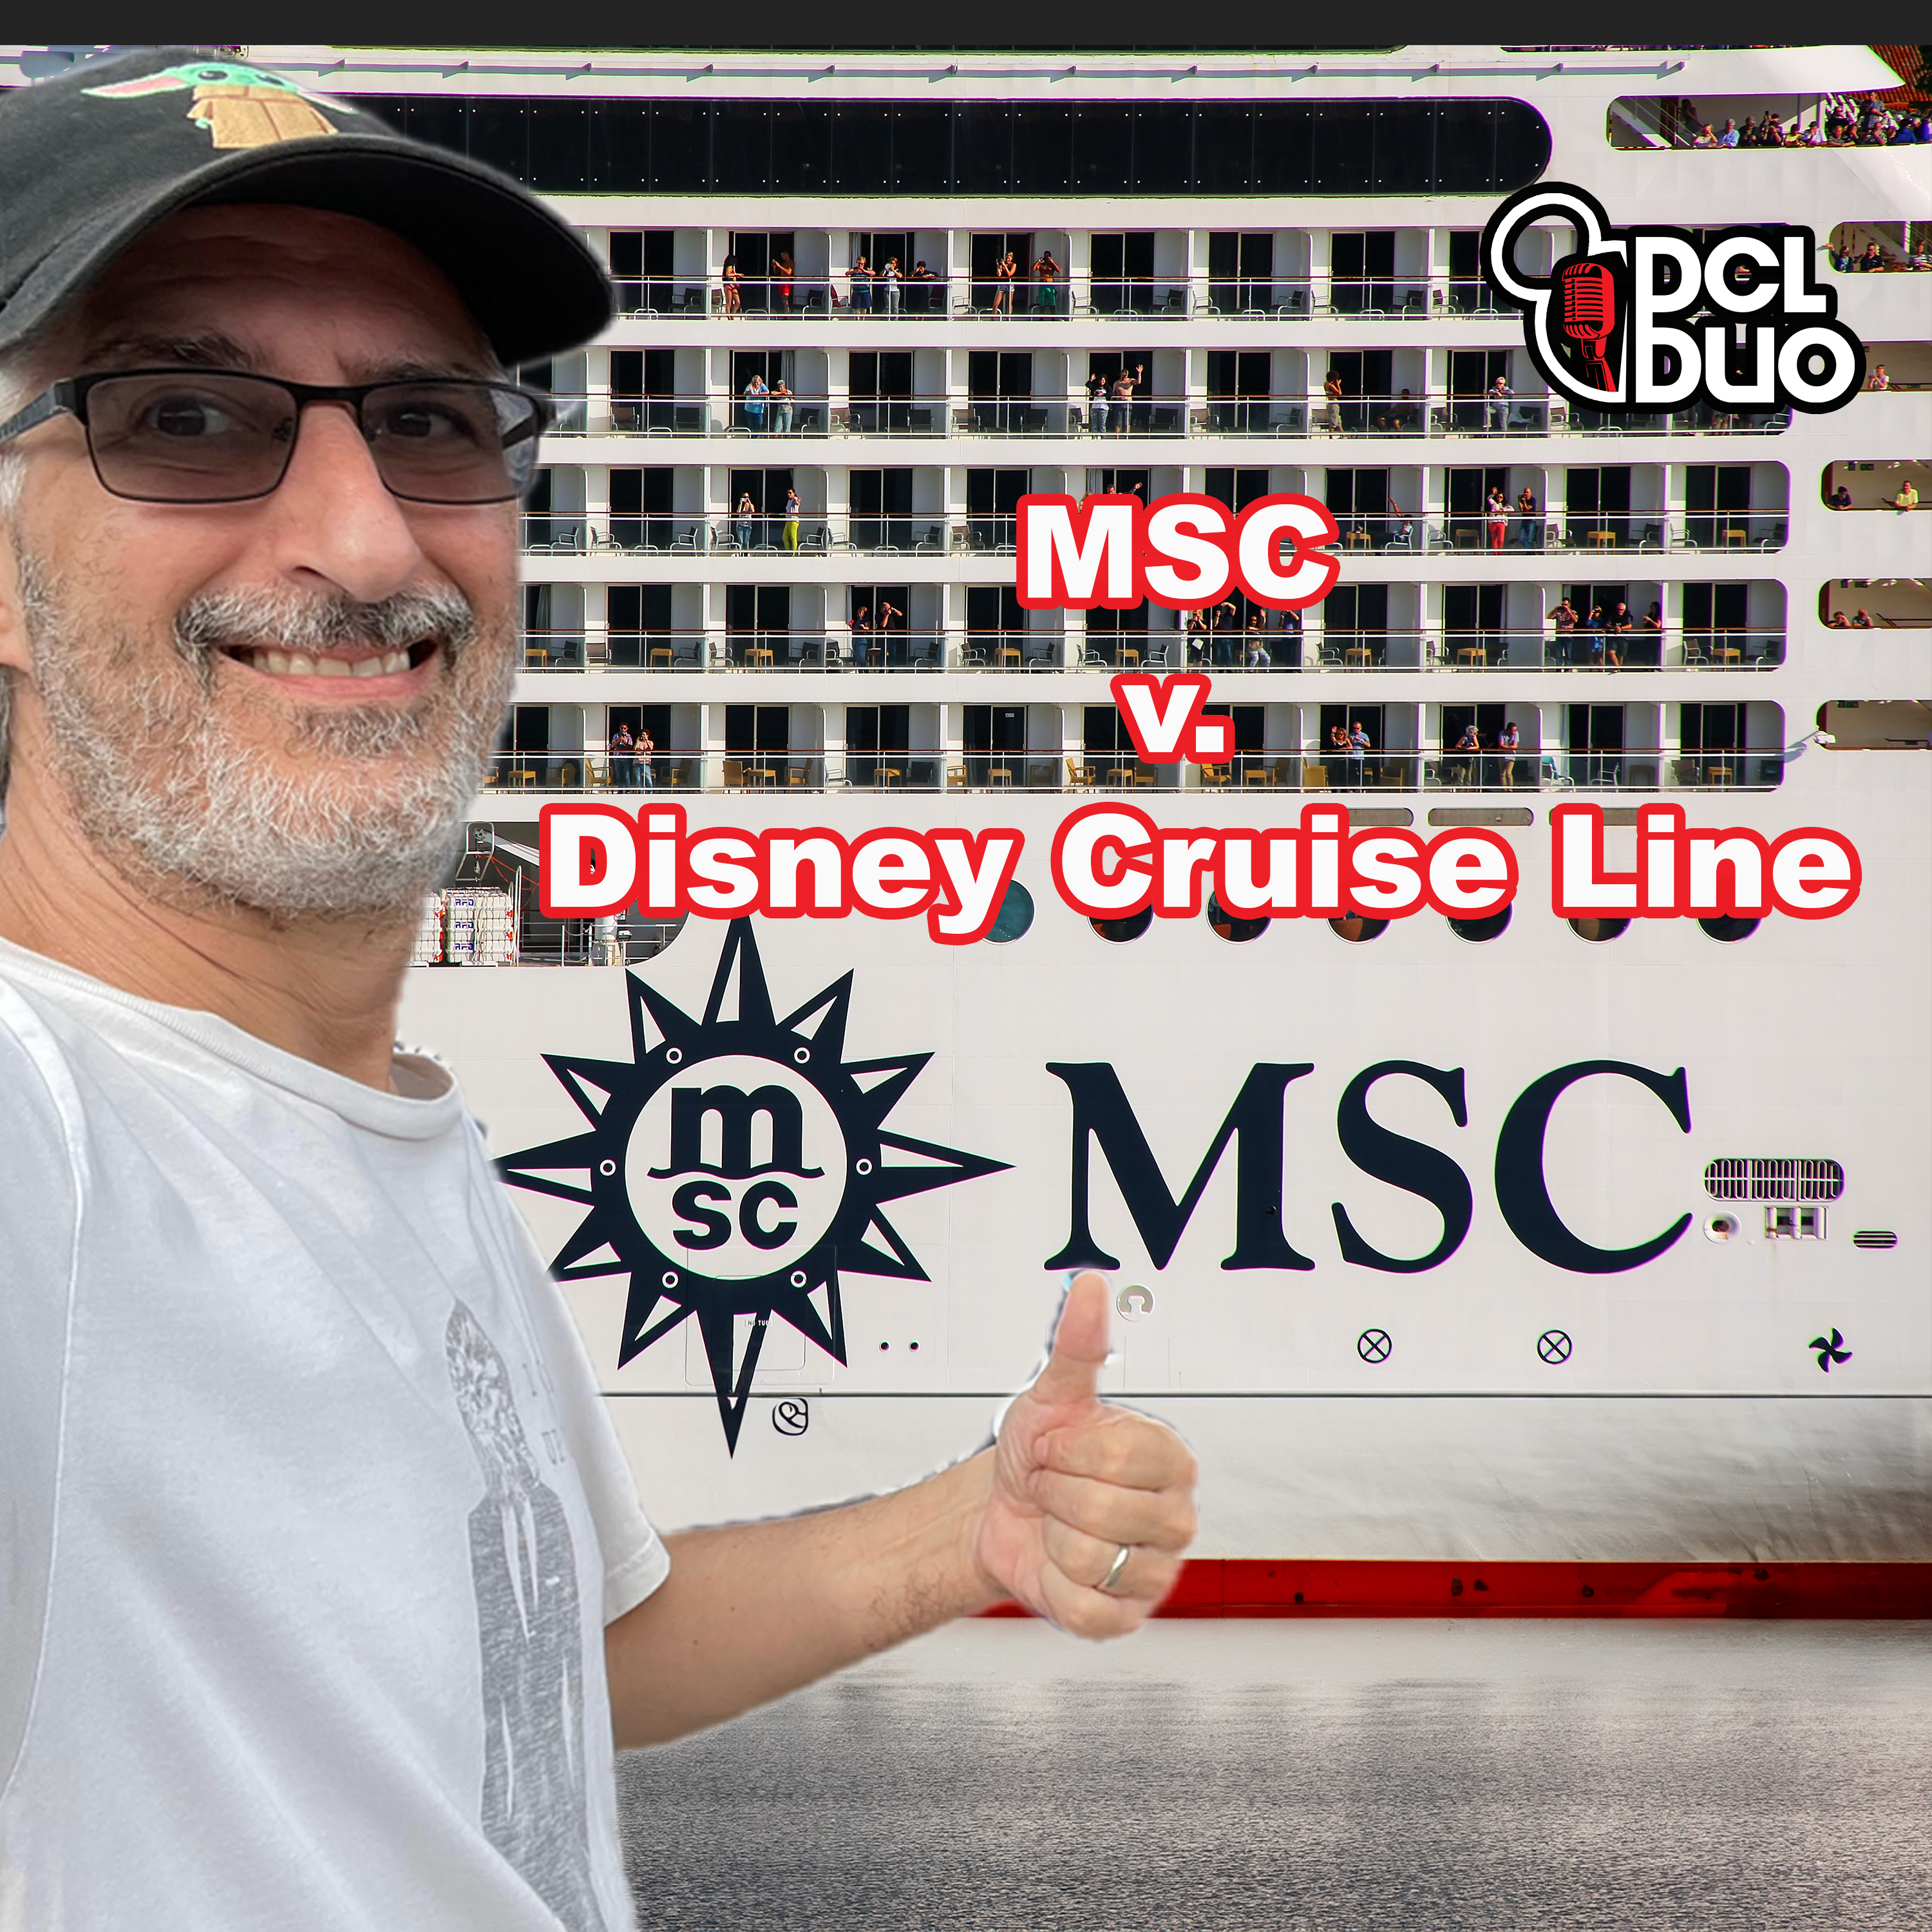 Ep. 421 - Live Bonus Show - Carnival for Swanky People: MSC Cruise Lines v. Disney Cruise Lines with Seth Kubersky from the Unofficial Guides